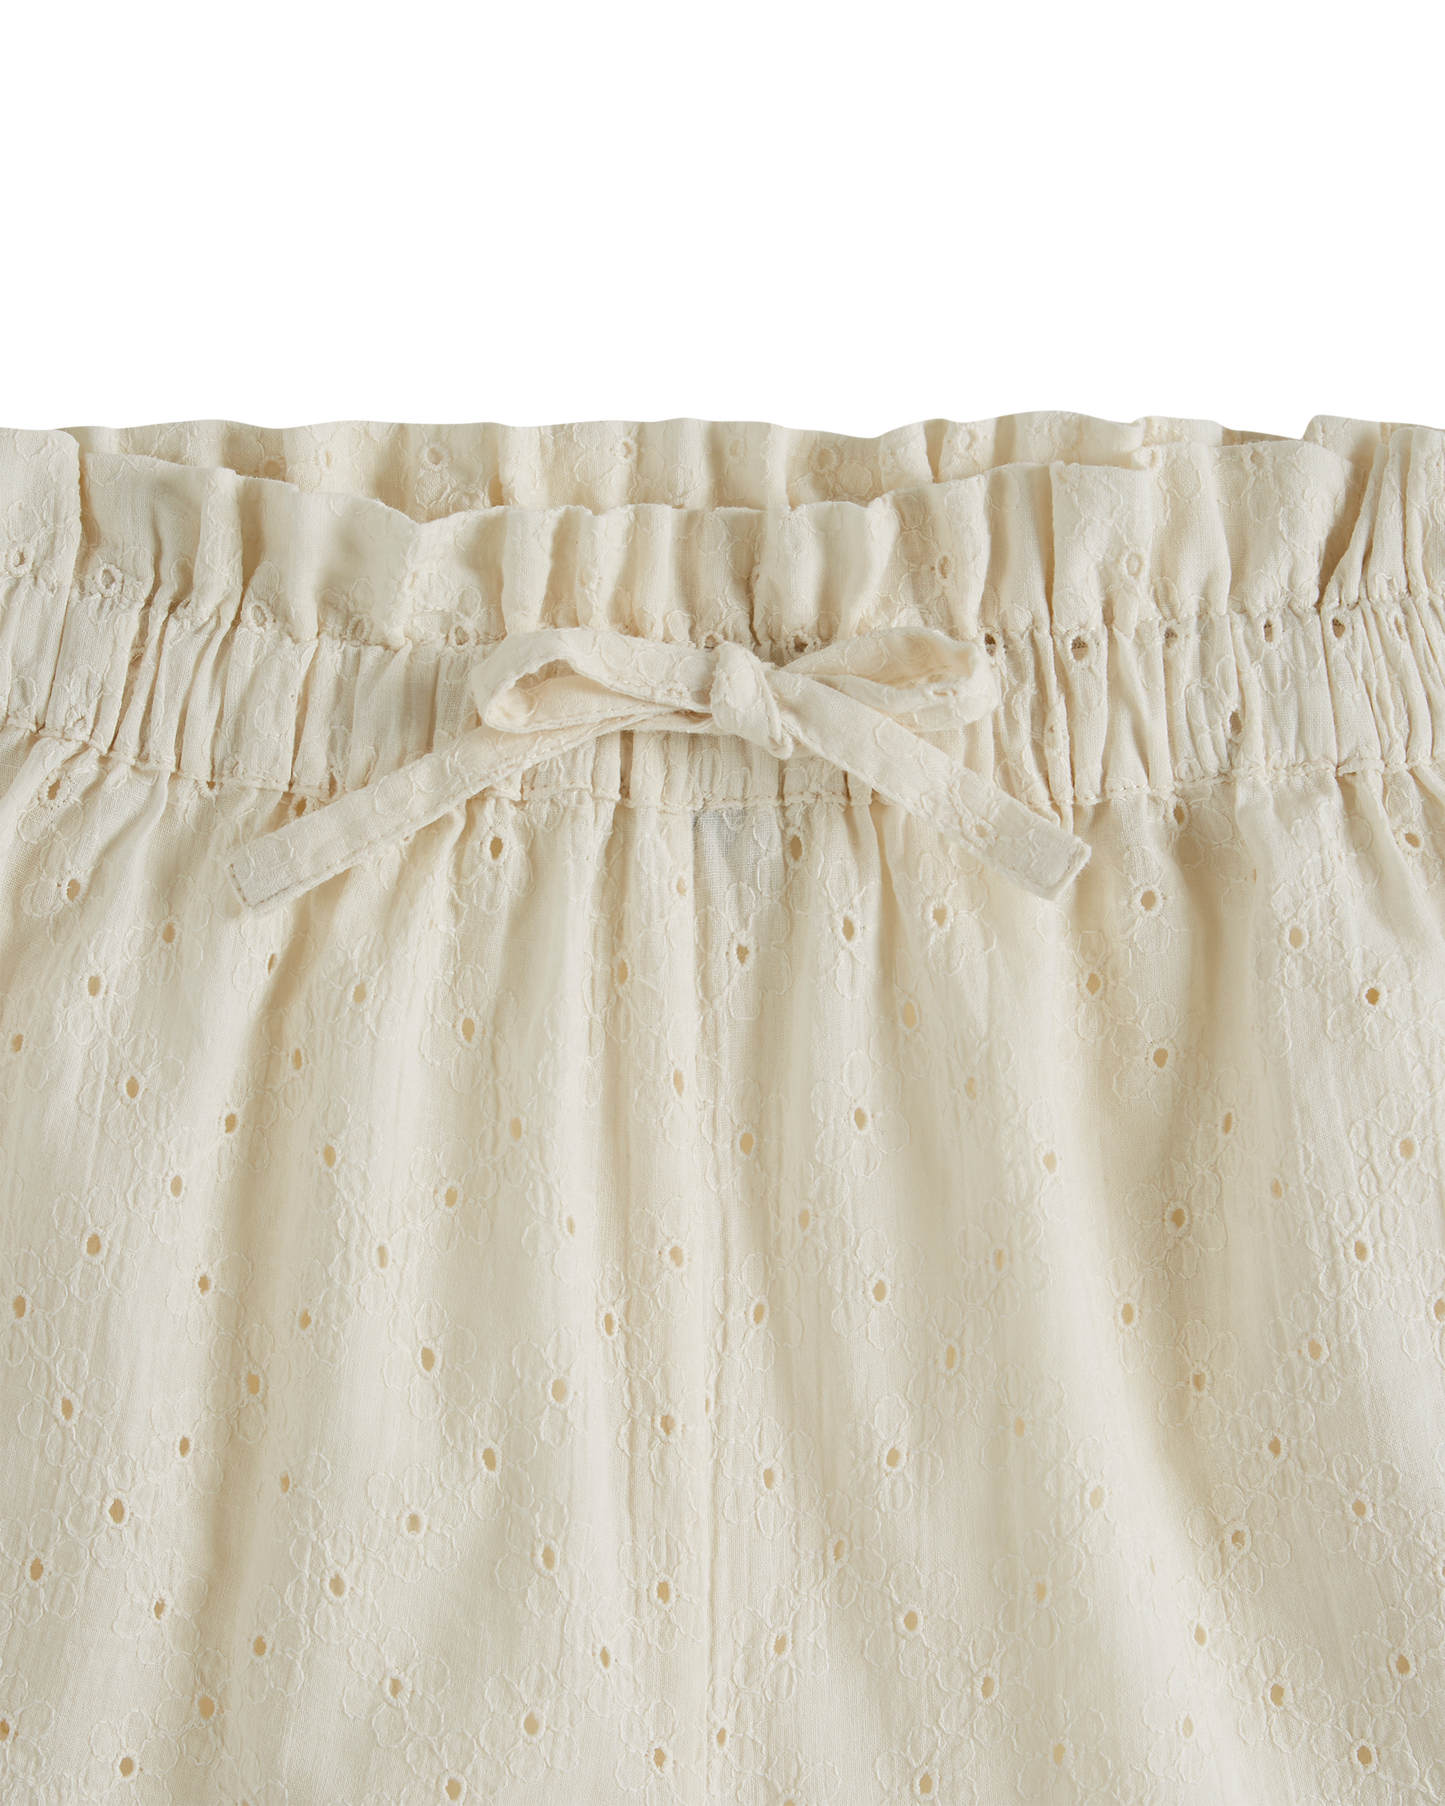 Short broderie anglaise fille chantilly